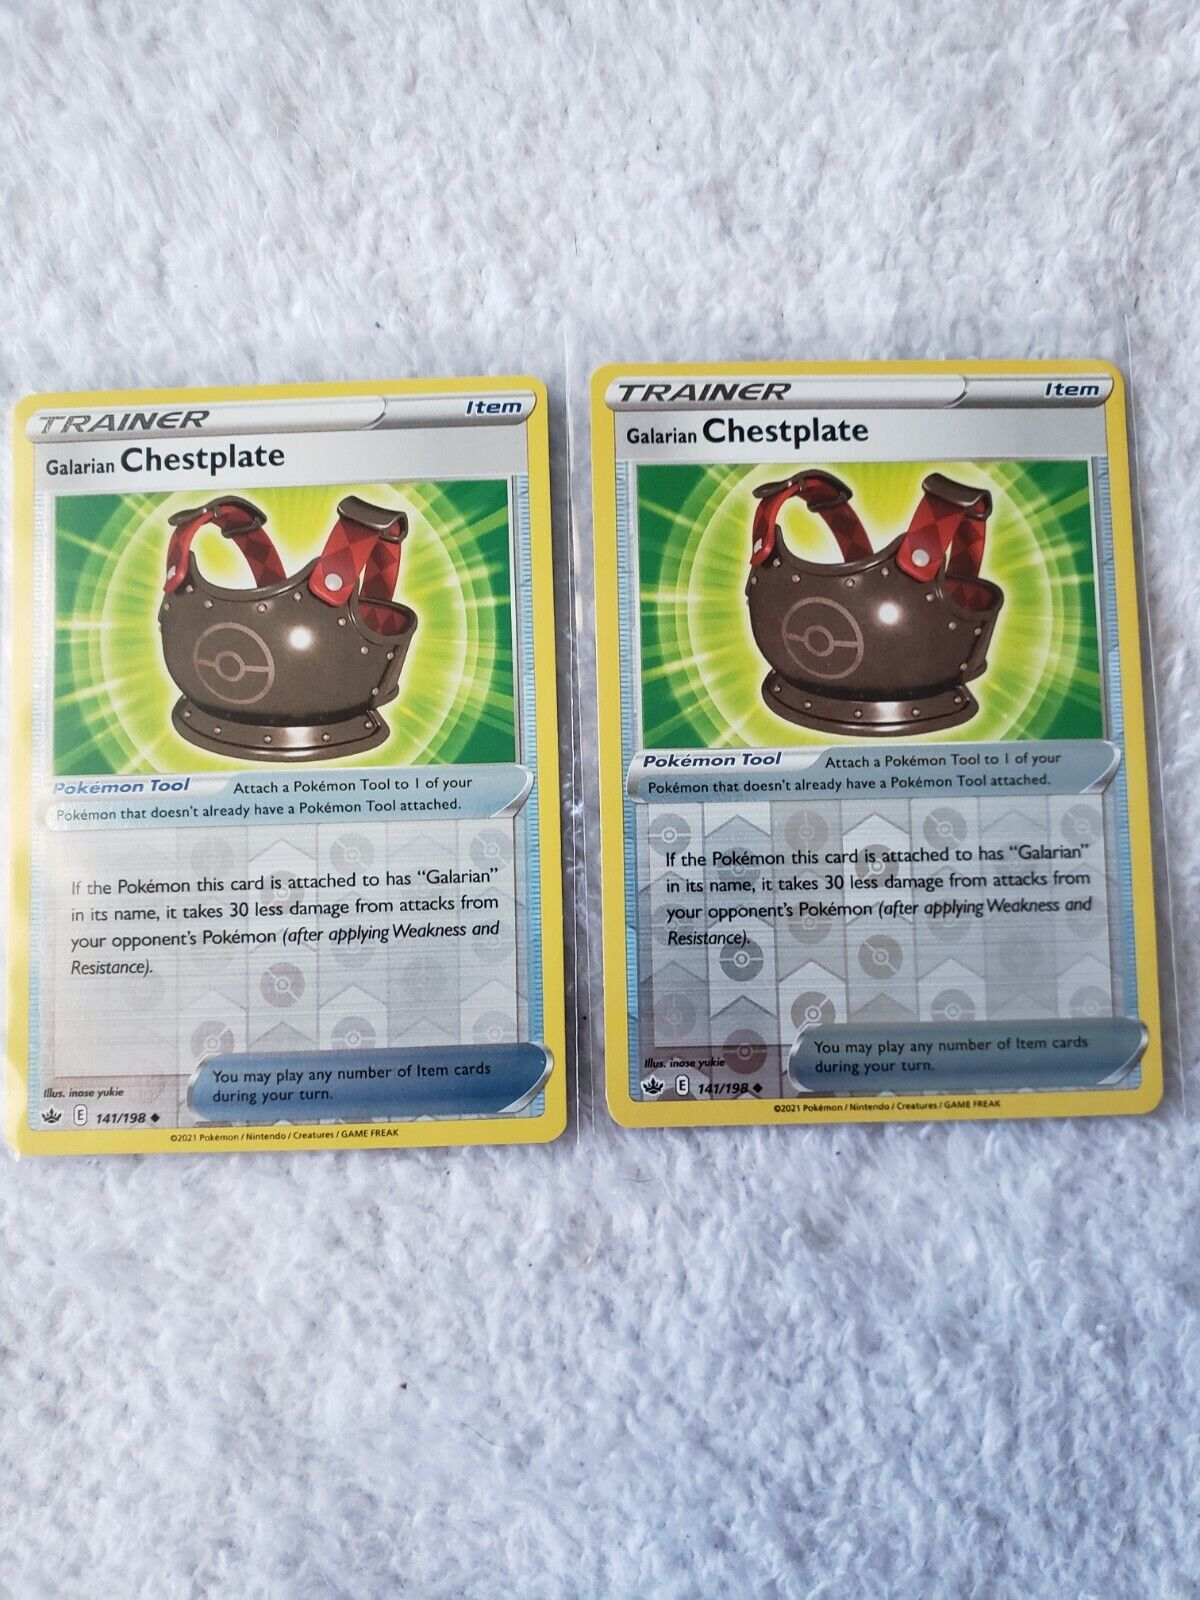 2x Pokemon TCG Chilling Reign - Galarian Chestplate 141/198 NM/M - Reverse Holo